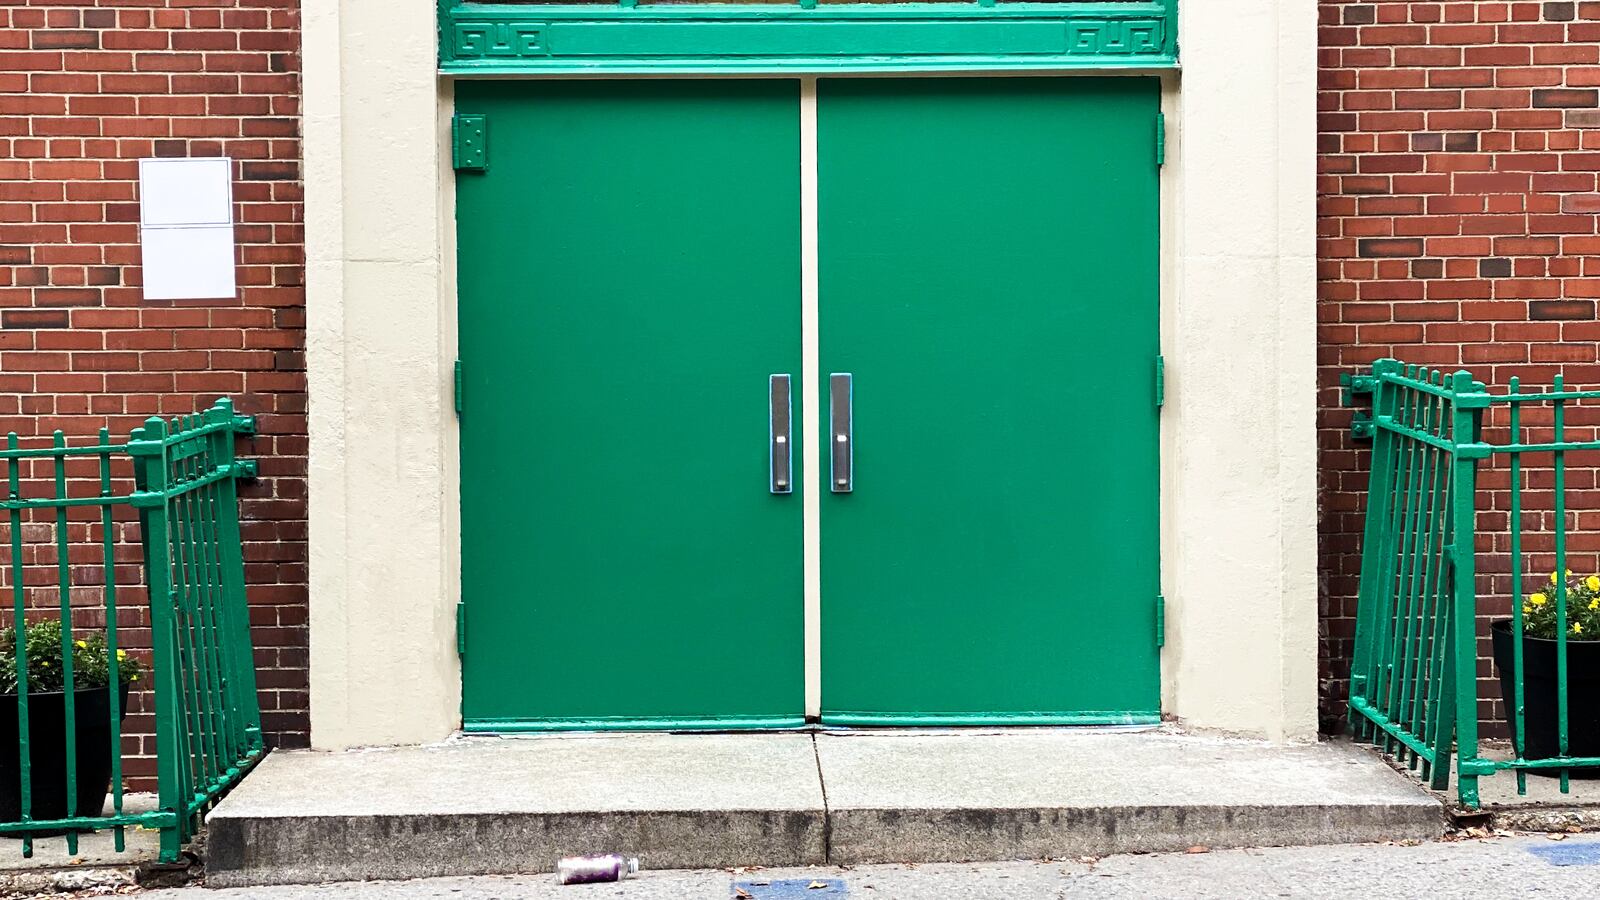 The outside of a brick school building with green doors.